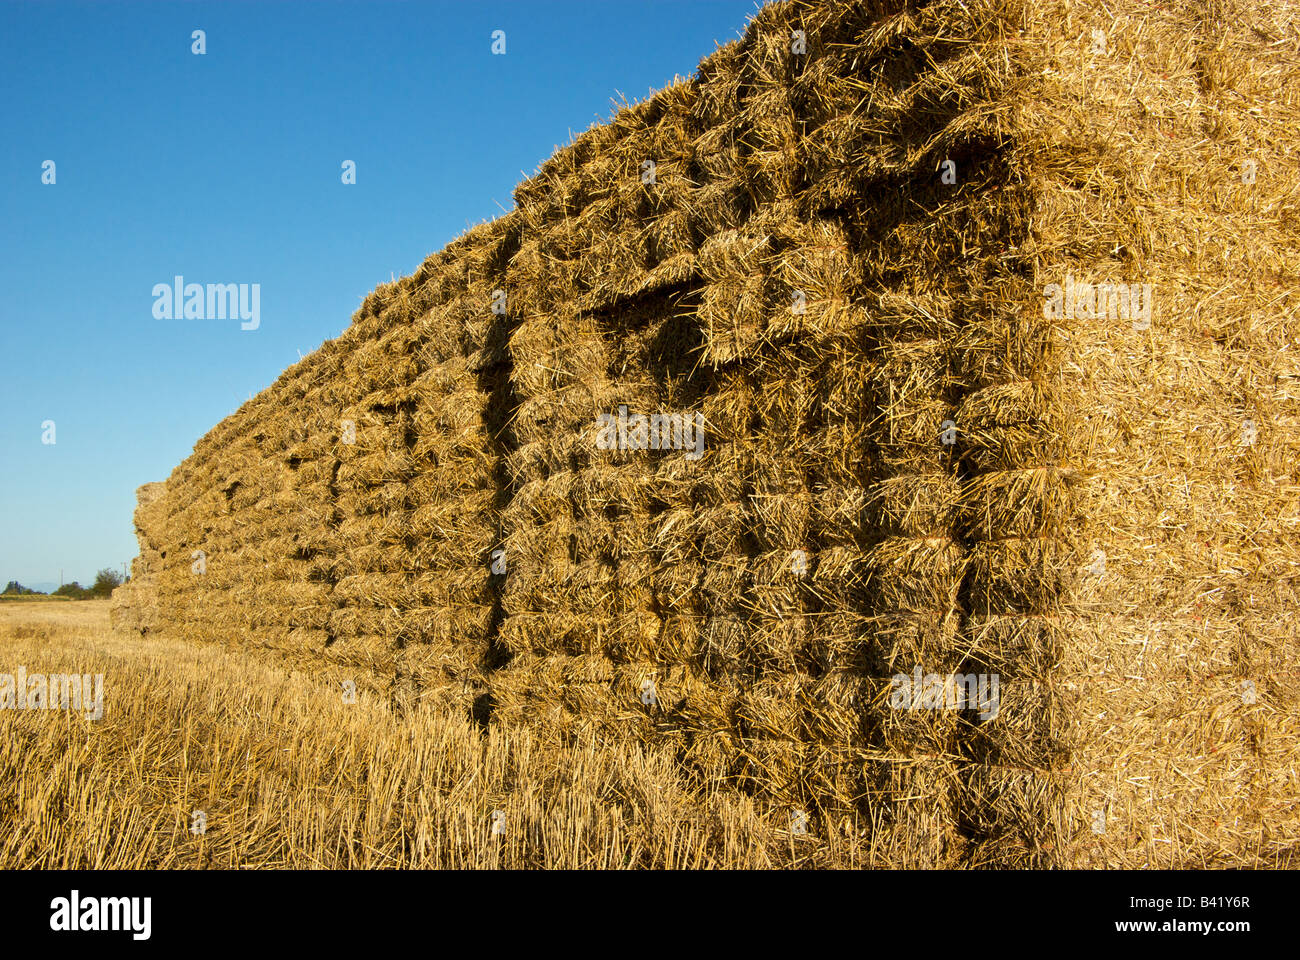 Wall of hay bales stacked in a barley field Stock Photo